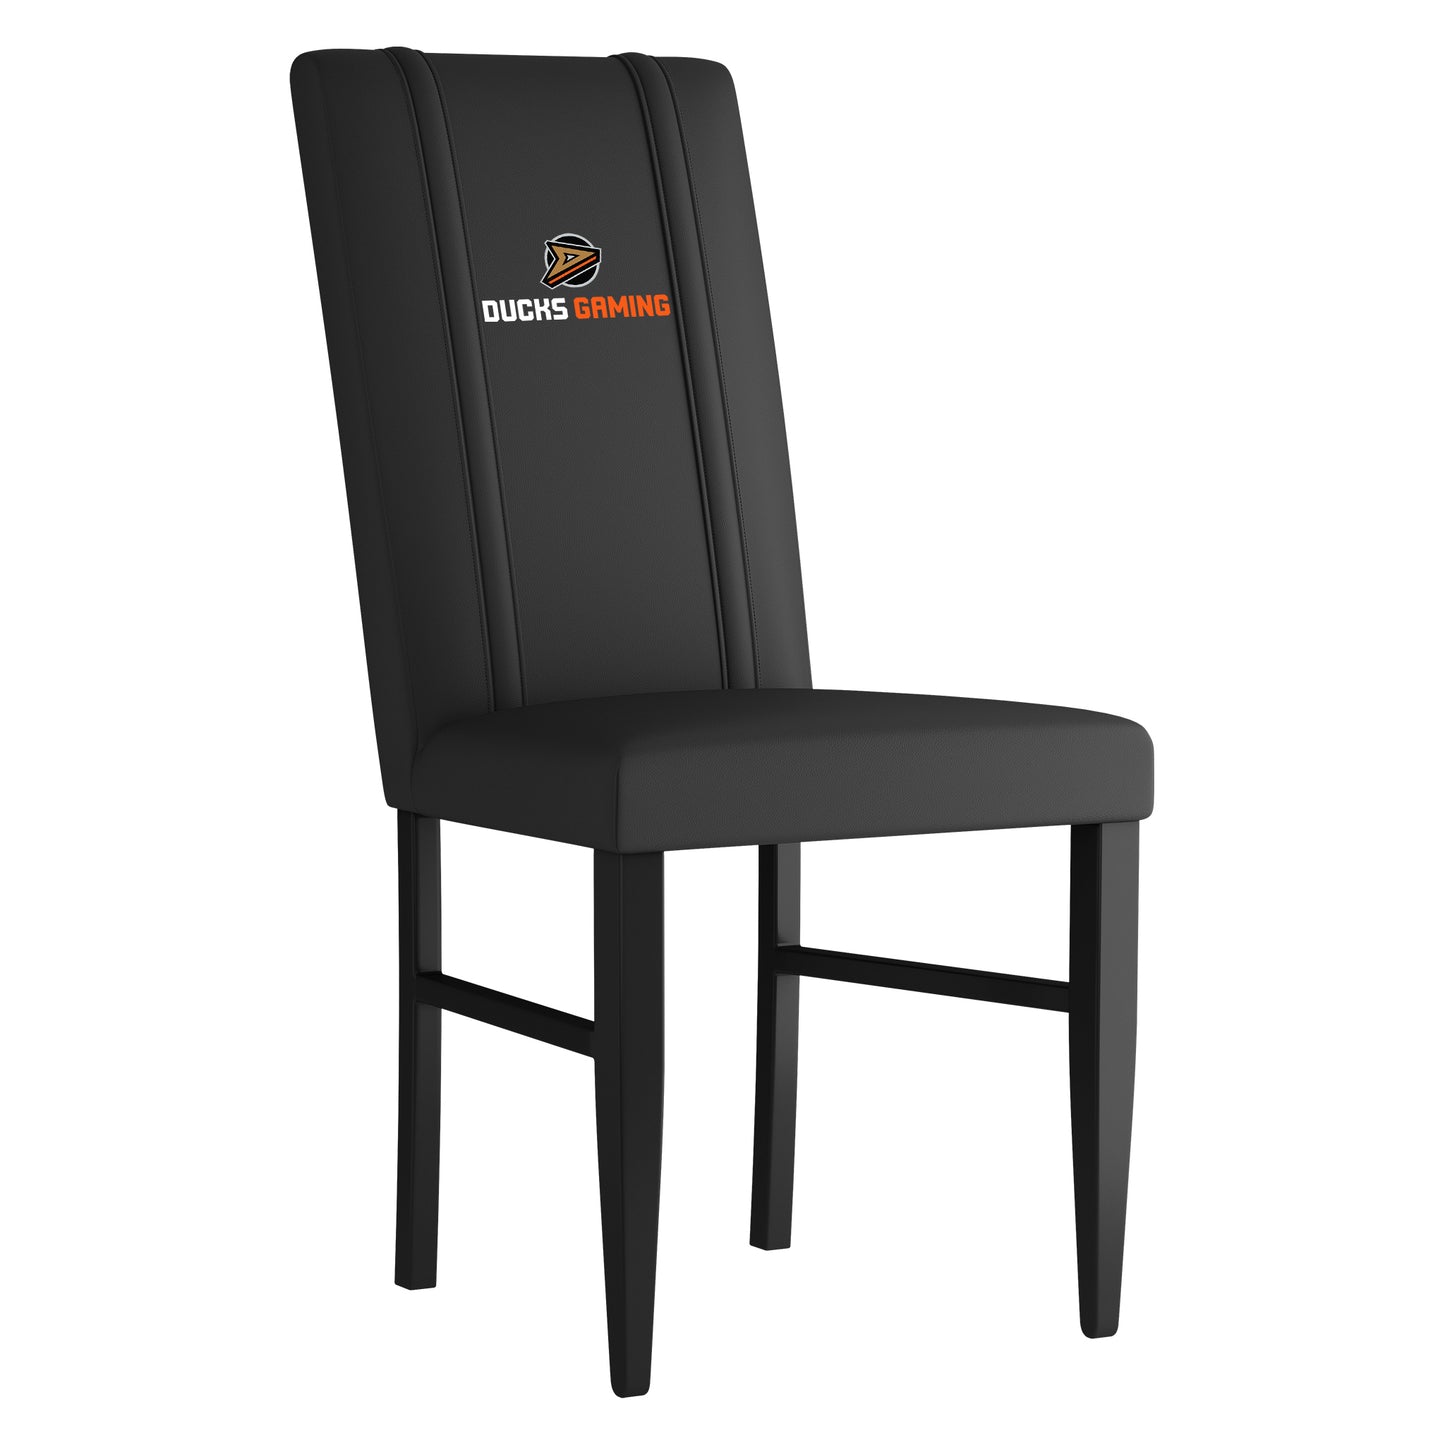 Side Chair 2000 with Ducks Gaming Logo Set of 2